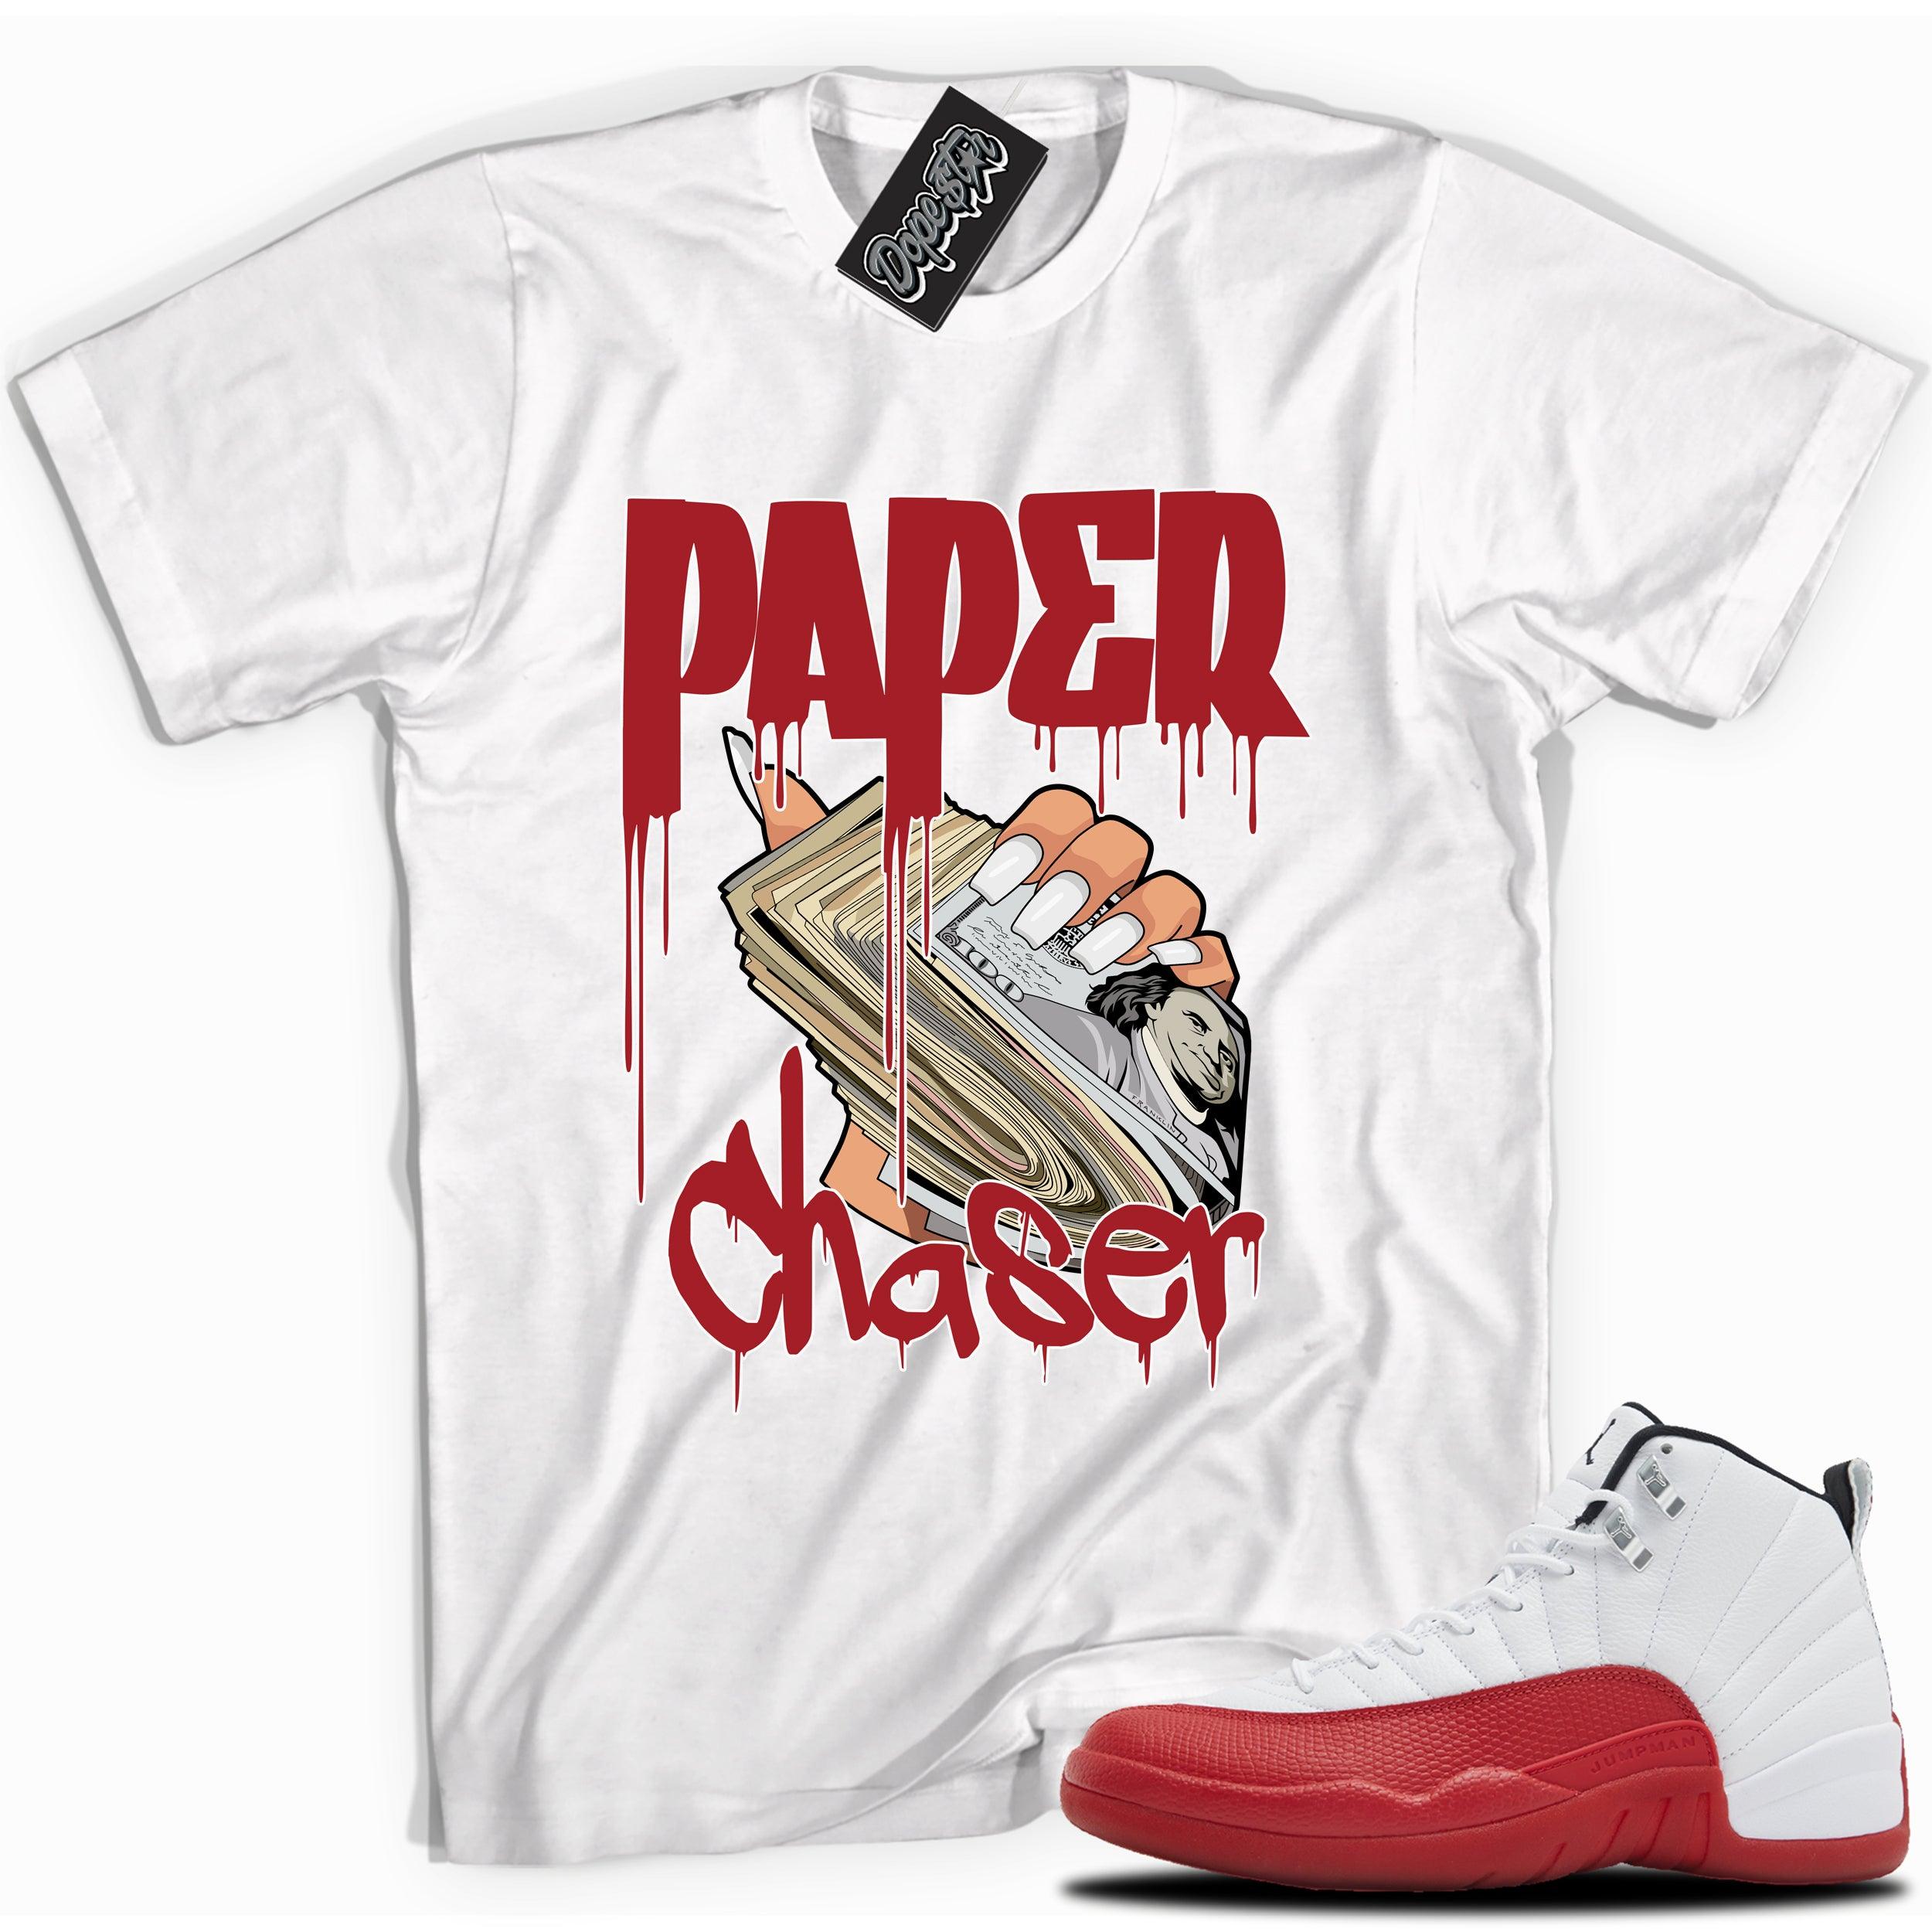 Cool White graphic tee with “Paper Chaser” print, that perfectly matches Air Jordan 12 Retro Cherry Red 2023 red and white sneakers